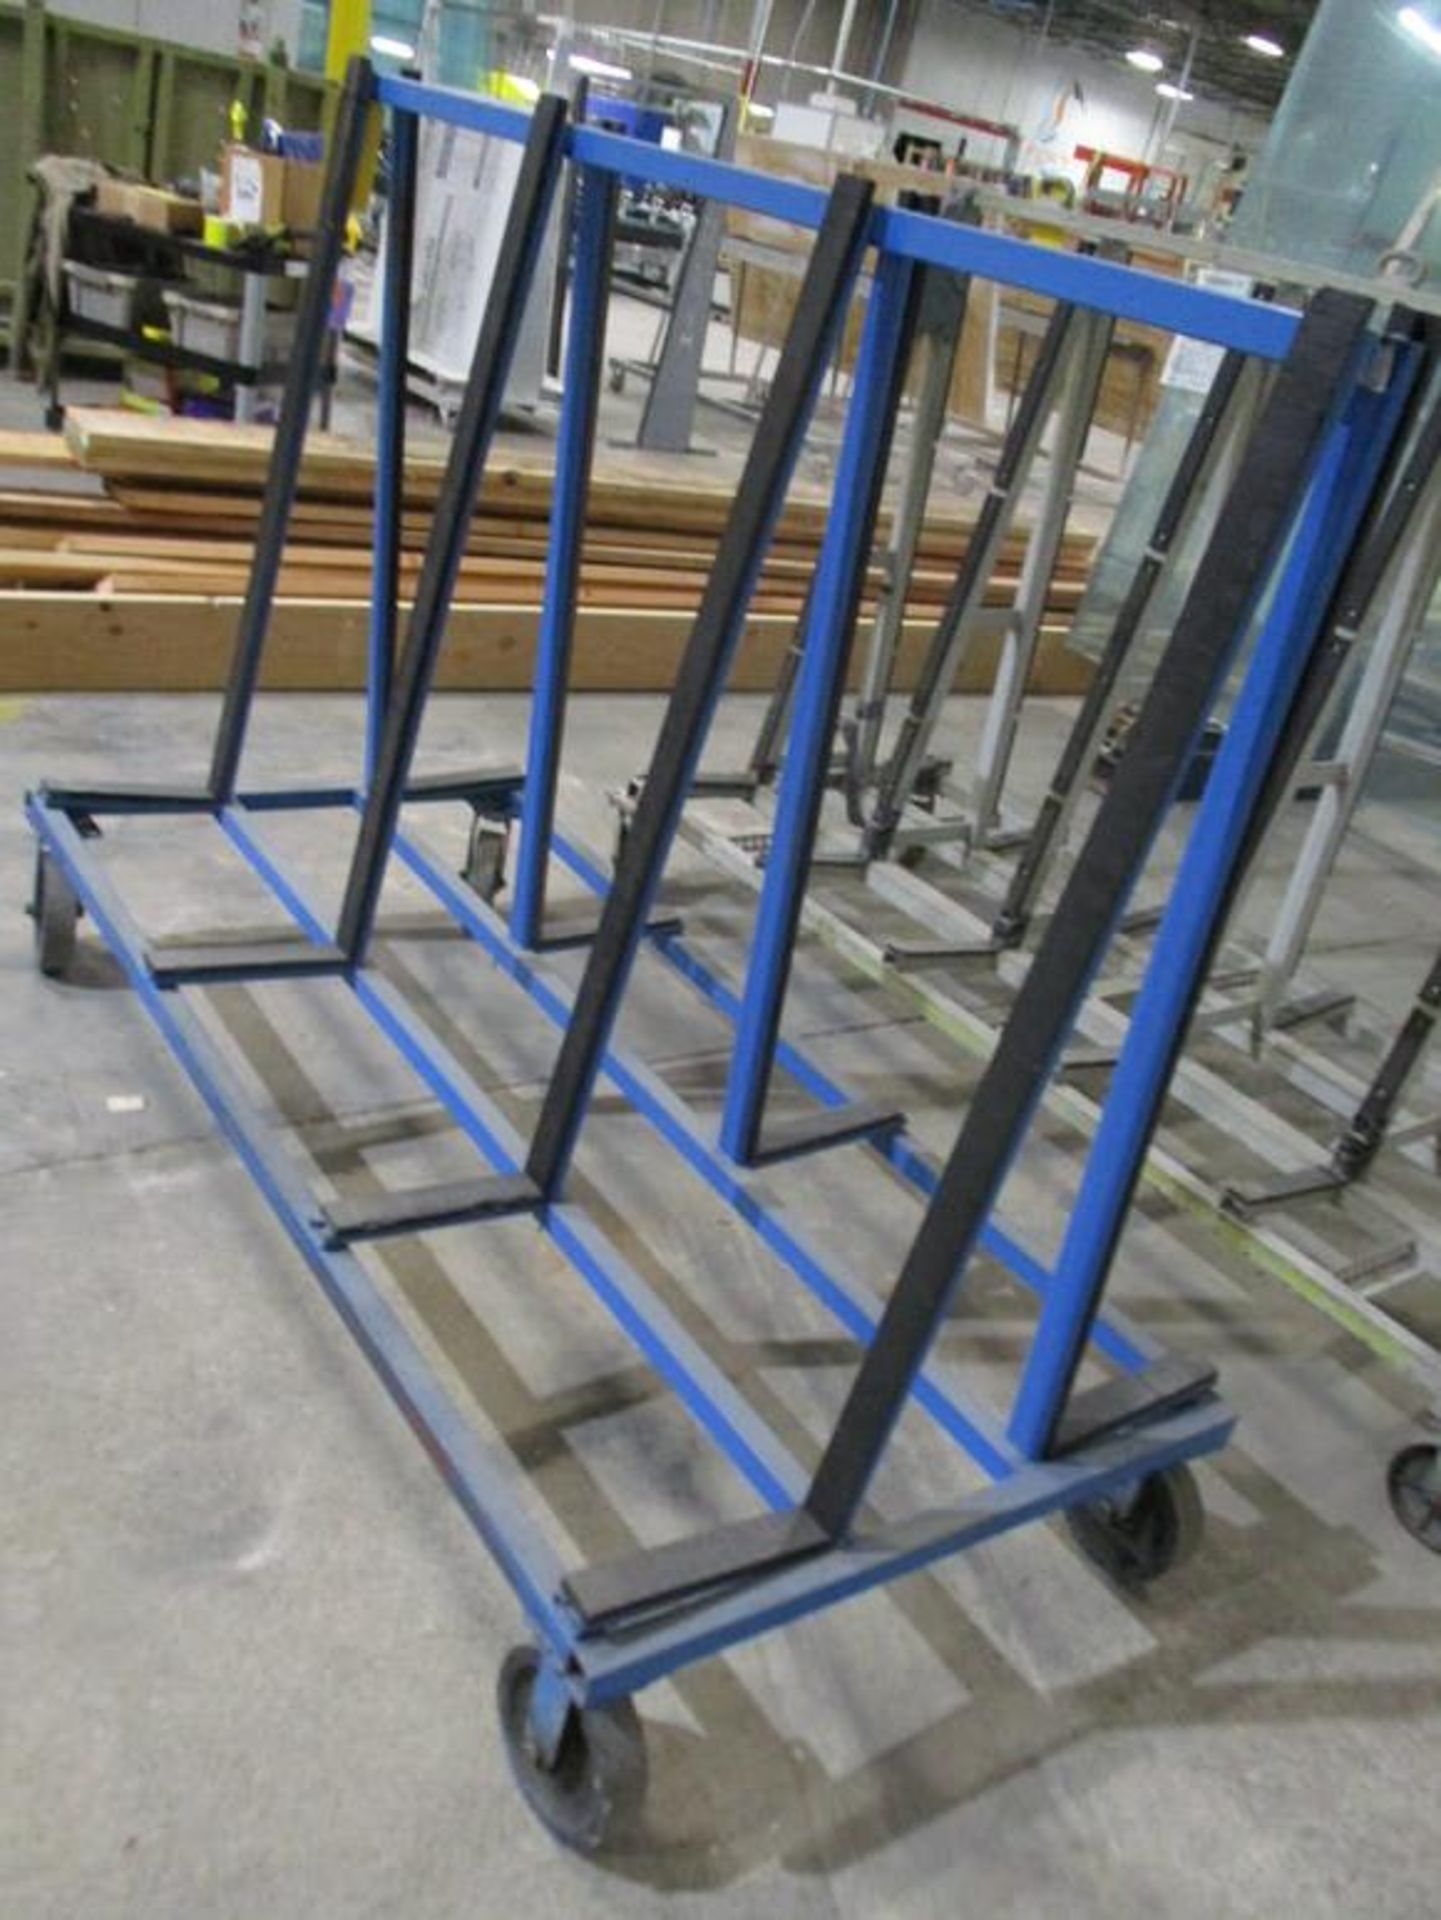 PORTABLE METAL DOUBLE SIDED GLASS RACK, APPROX 4' X 9' 5'